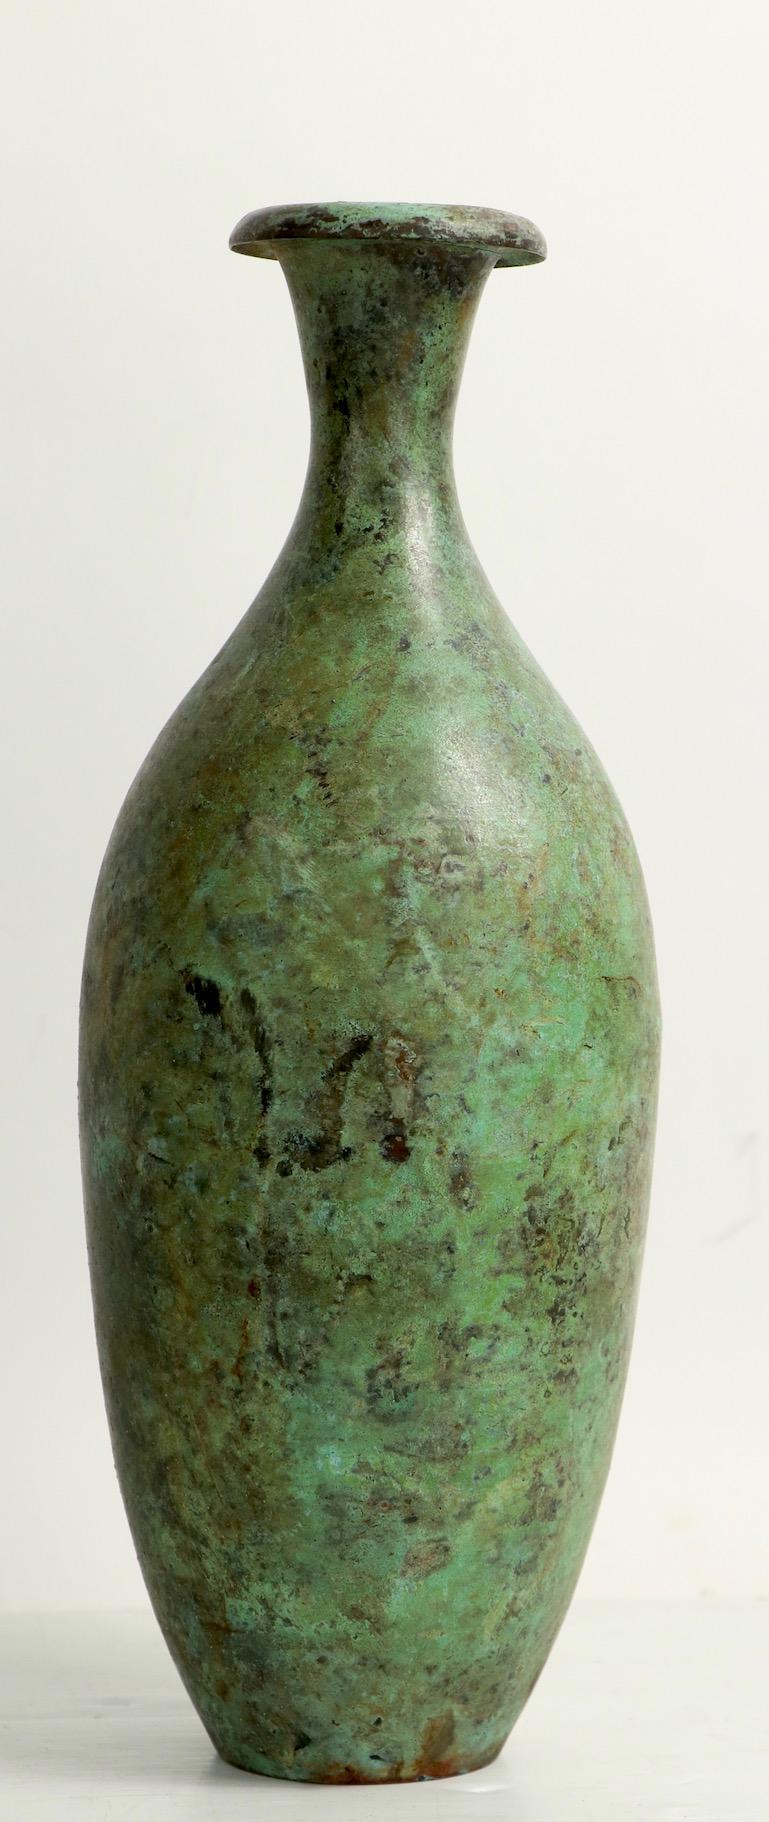 Wonderful solid bronze vase in patinated verdigris finish, possibly GAB Sweden made. The vase is free of damage, unsigned.